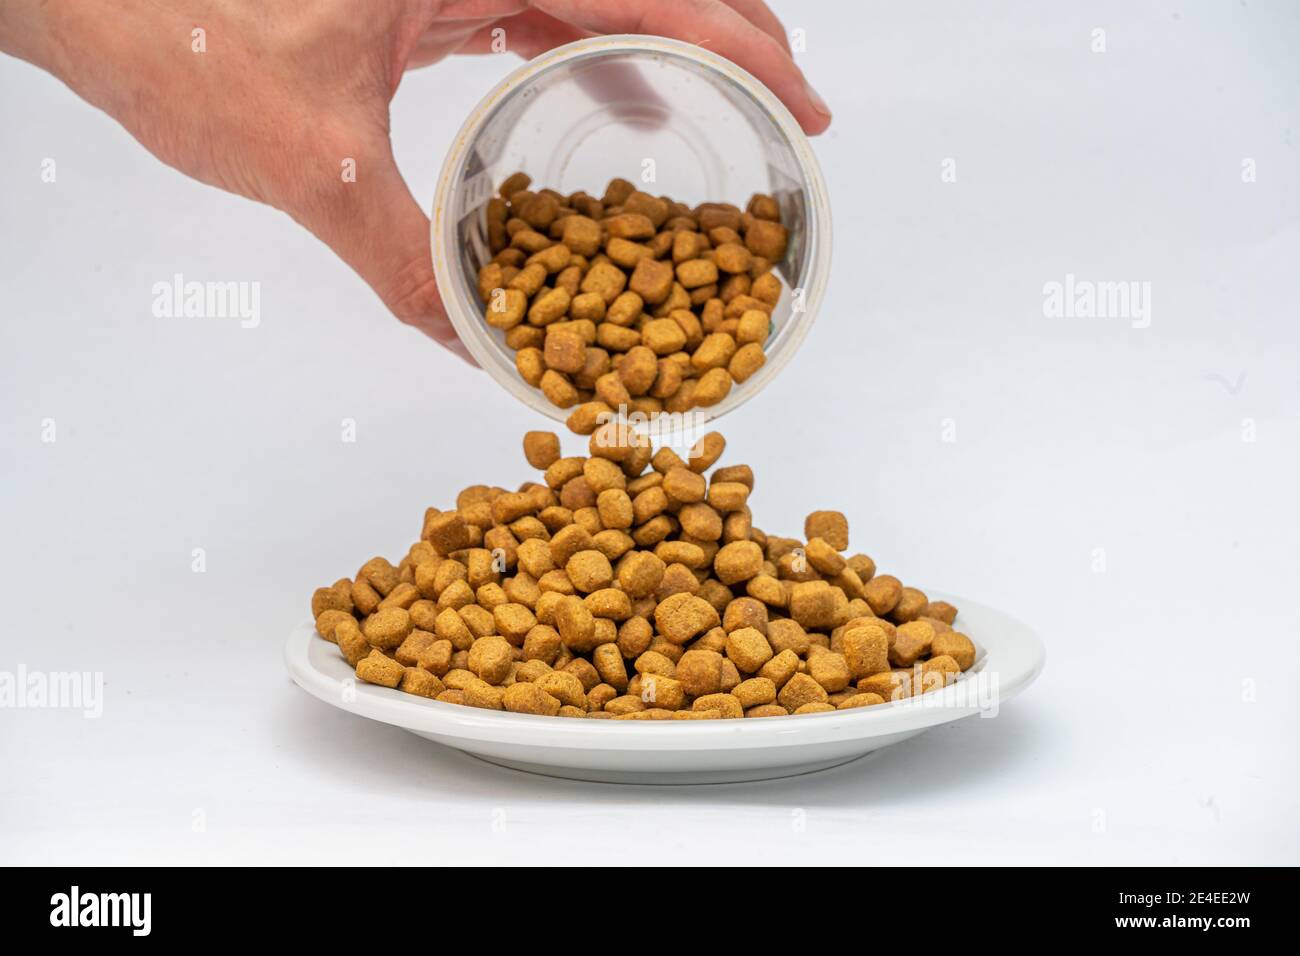 Closeup shot of a person pouring out animal food onto a plate Stock Photo